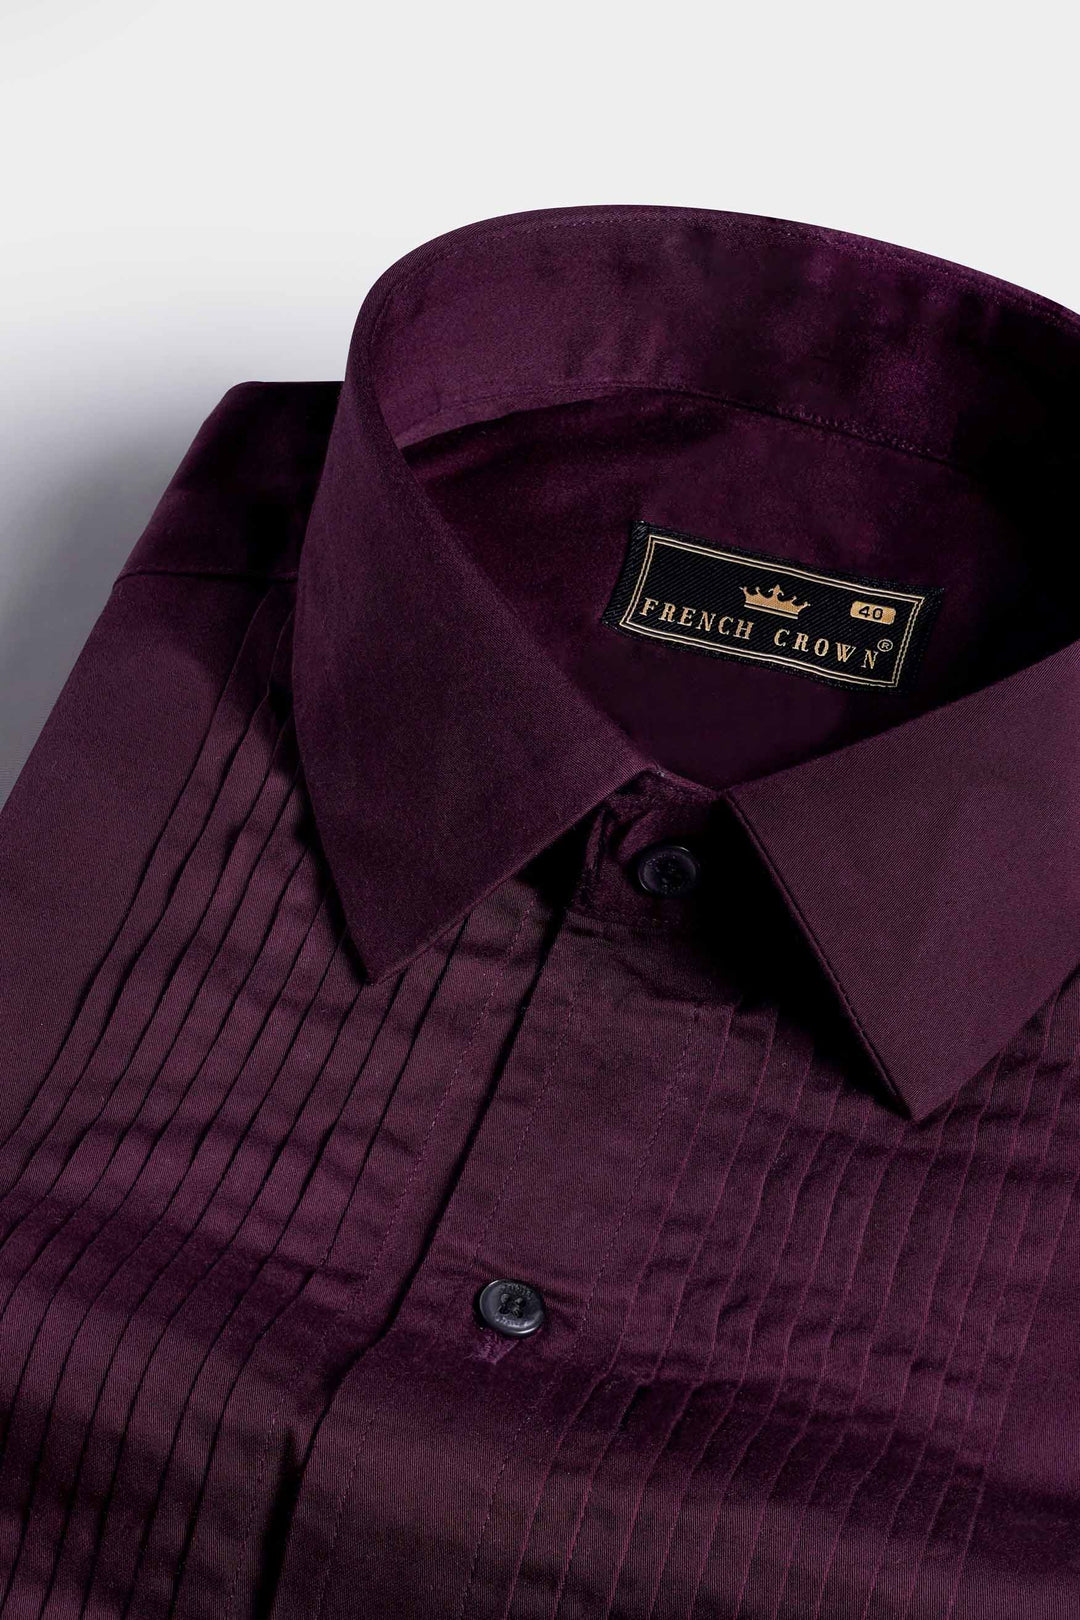 Which color shirt and pants best suits with a maroon-colored blazer? - Quora